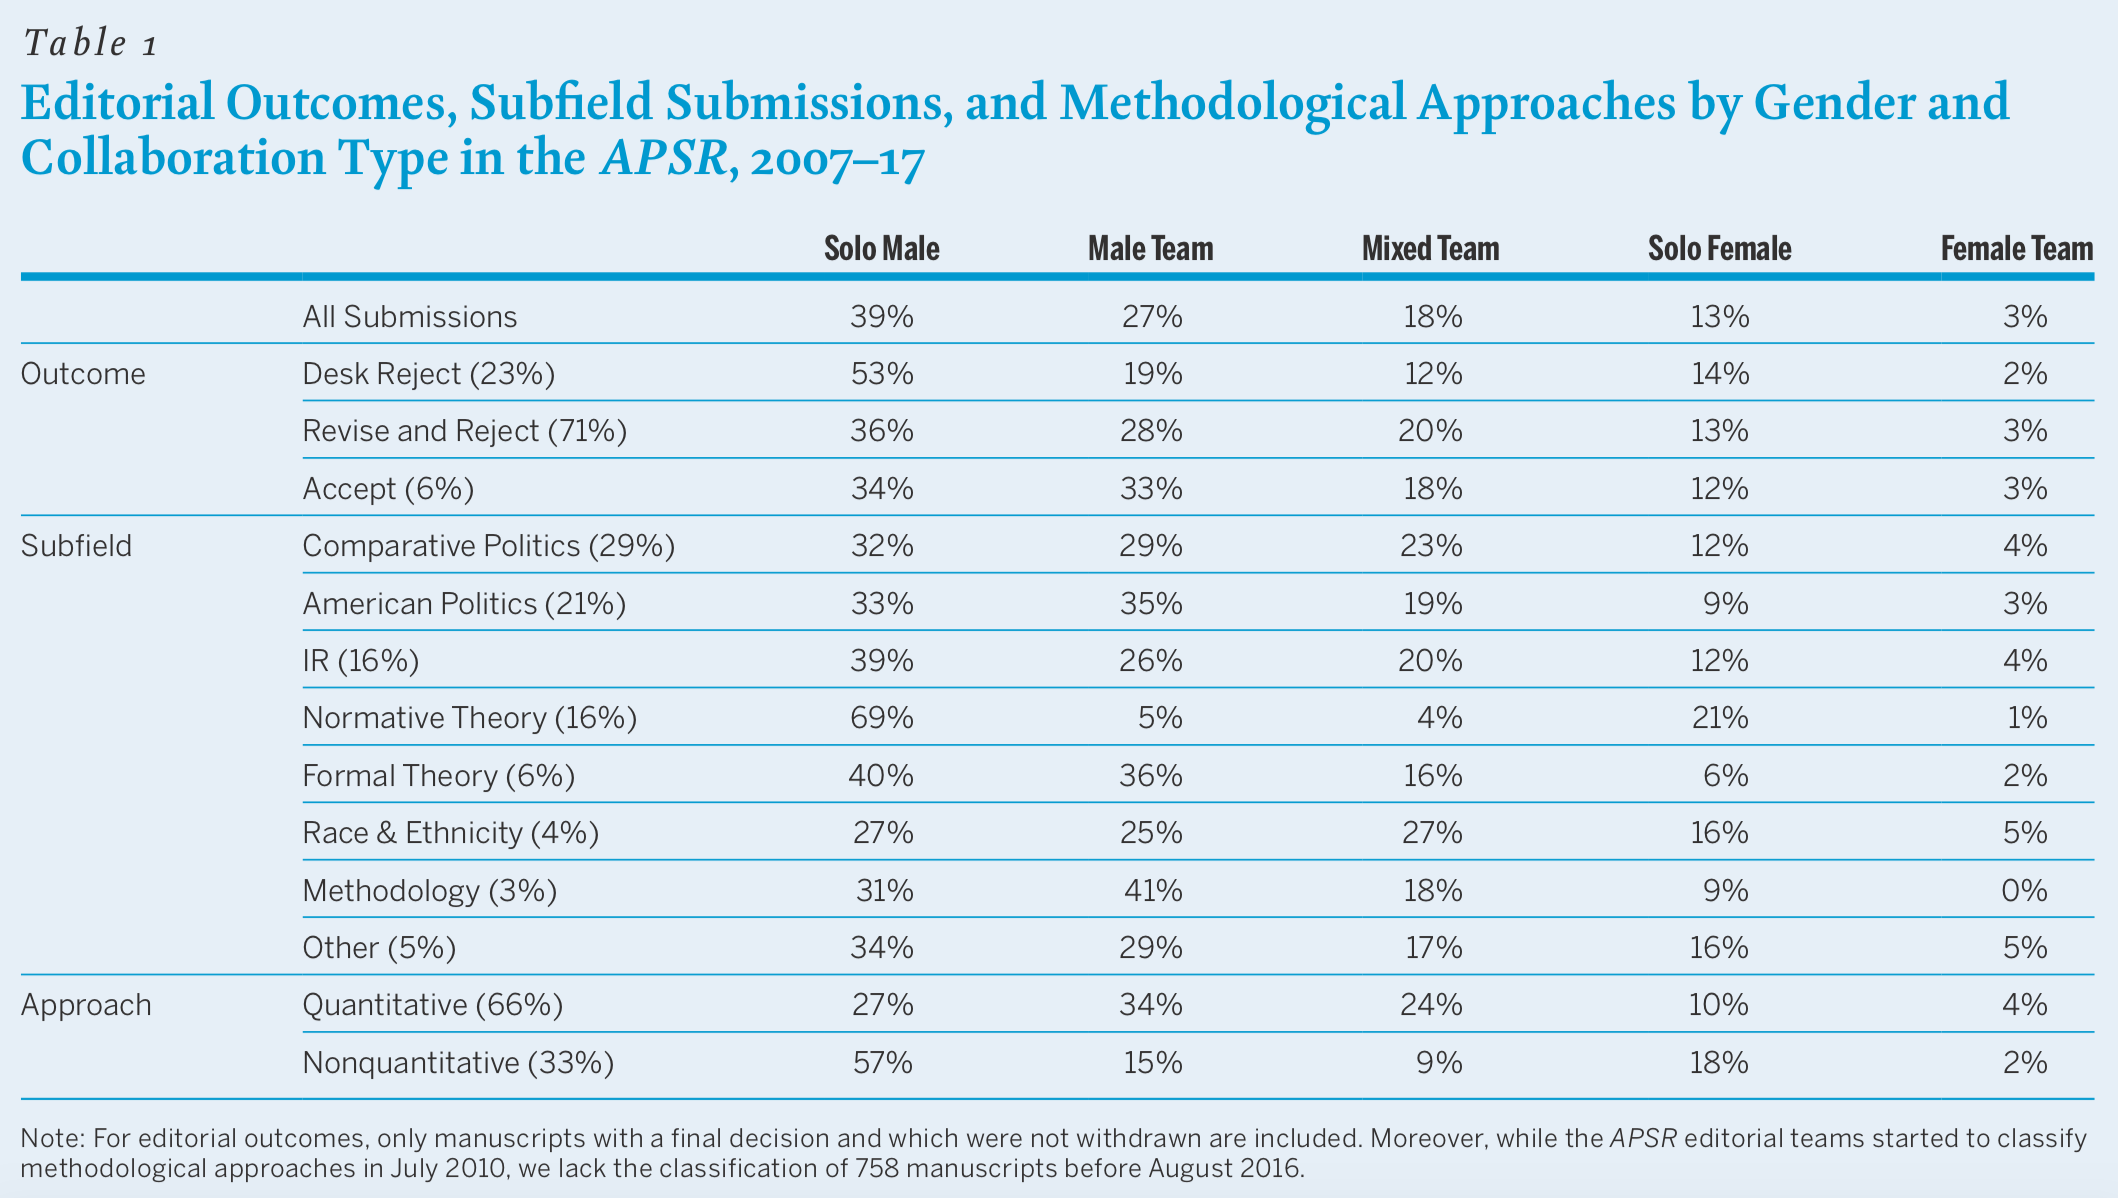 Editorial outcomes, subfield submissions and methodological approaches by gender and collaboration type in the American Political Science Review, from 2007 to 2017